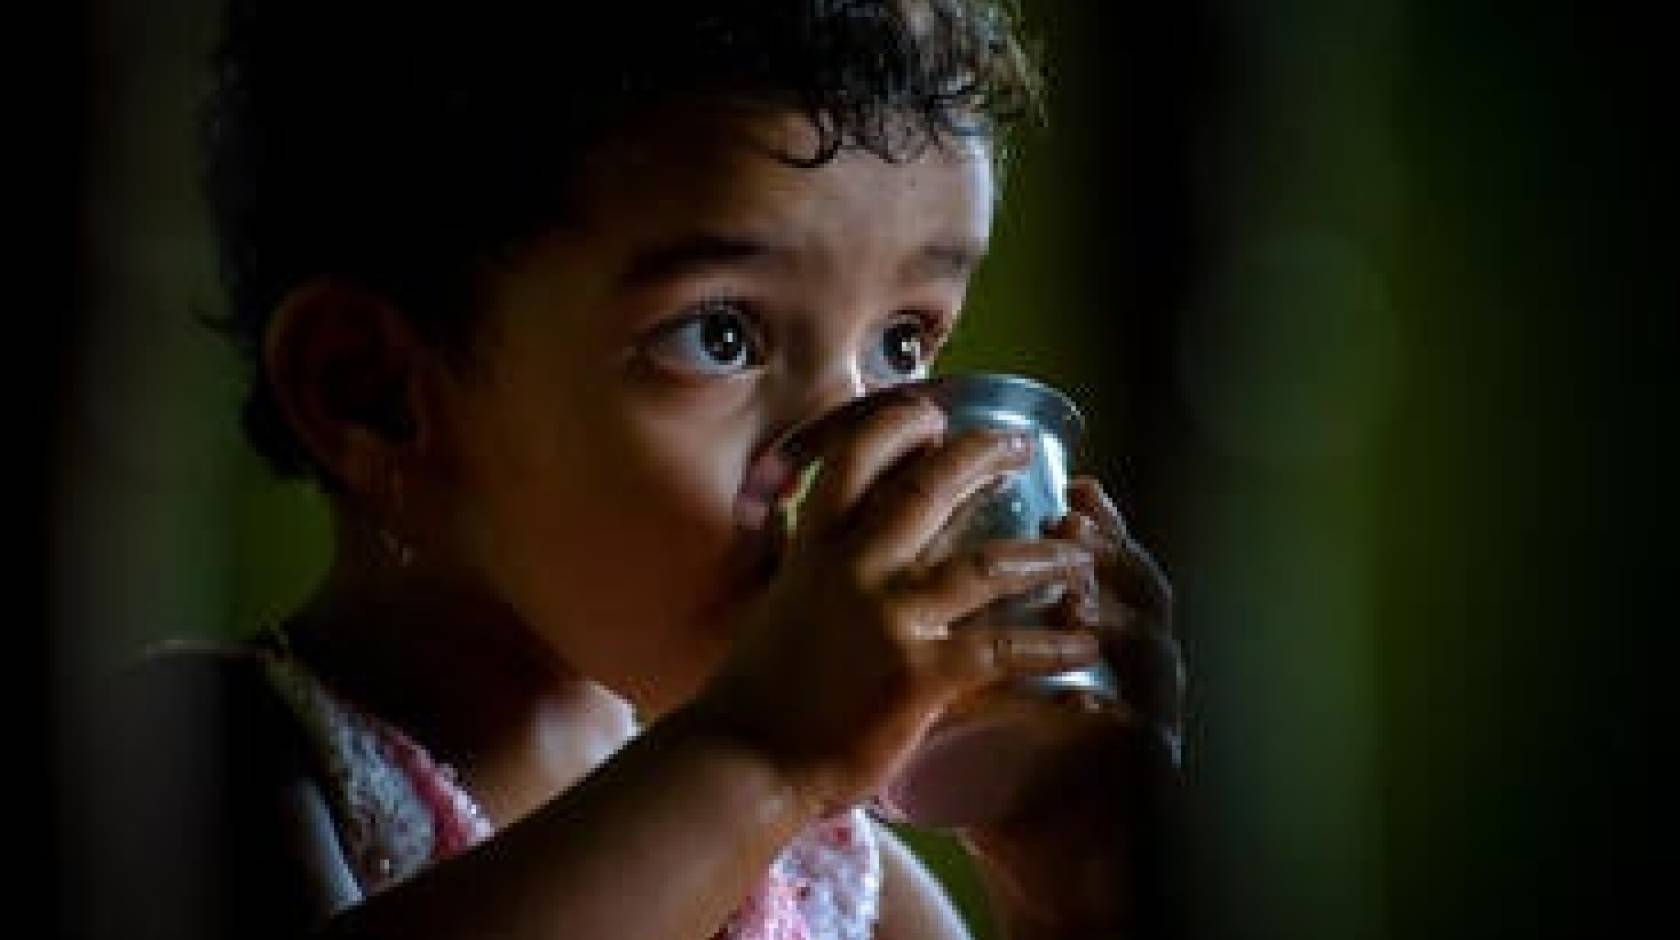 A child drinking water